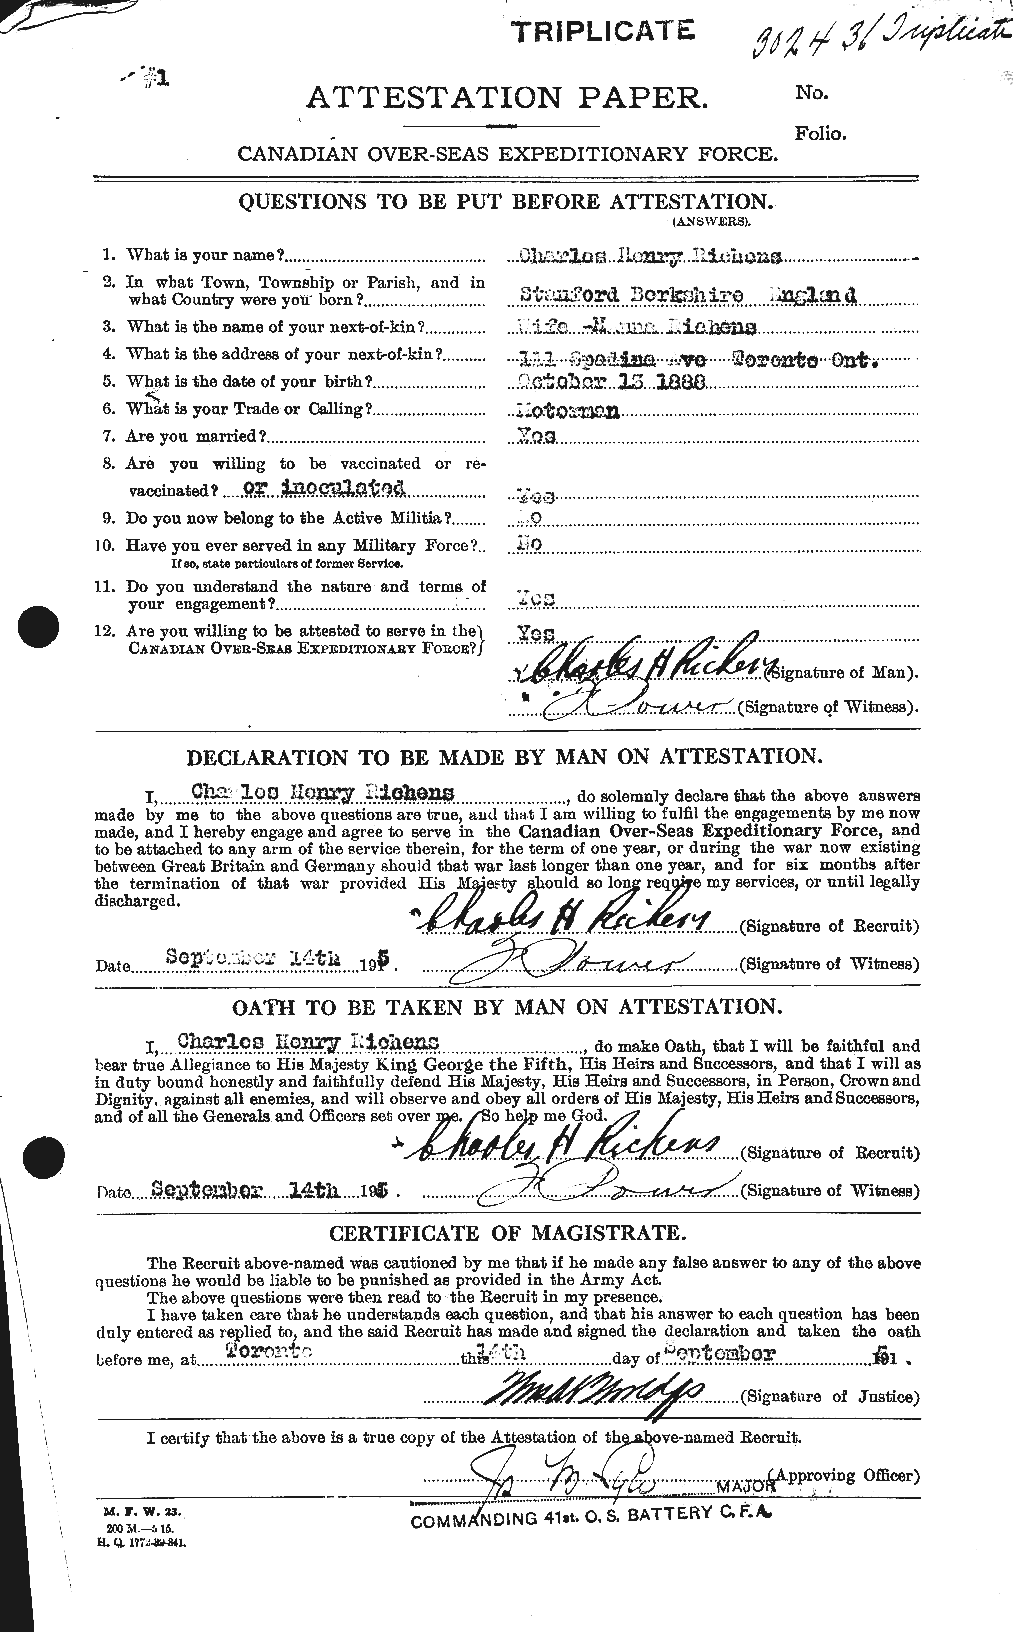 Personnel Records of the First World War - CEF 604056a